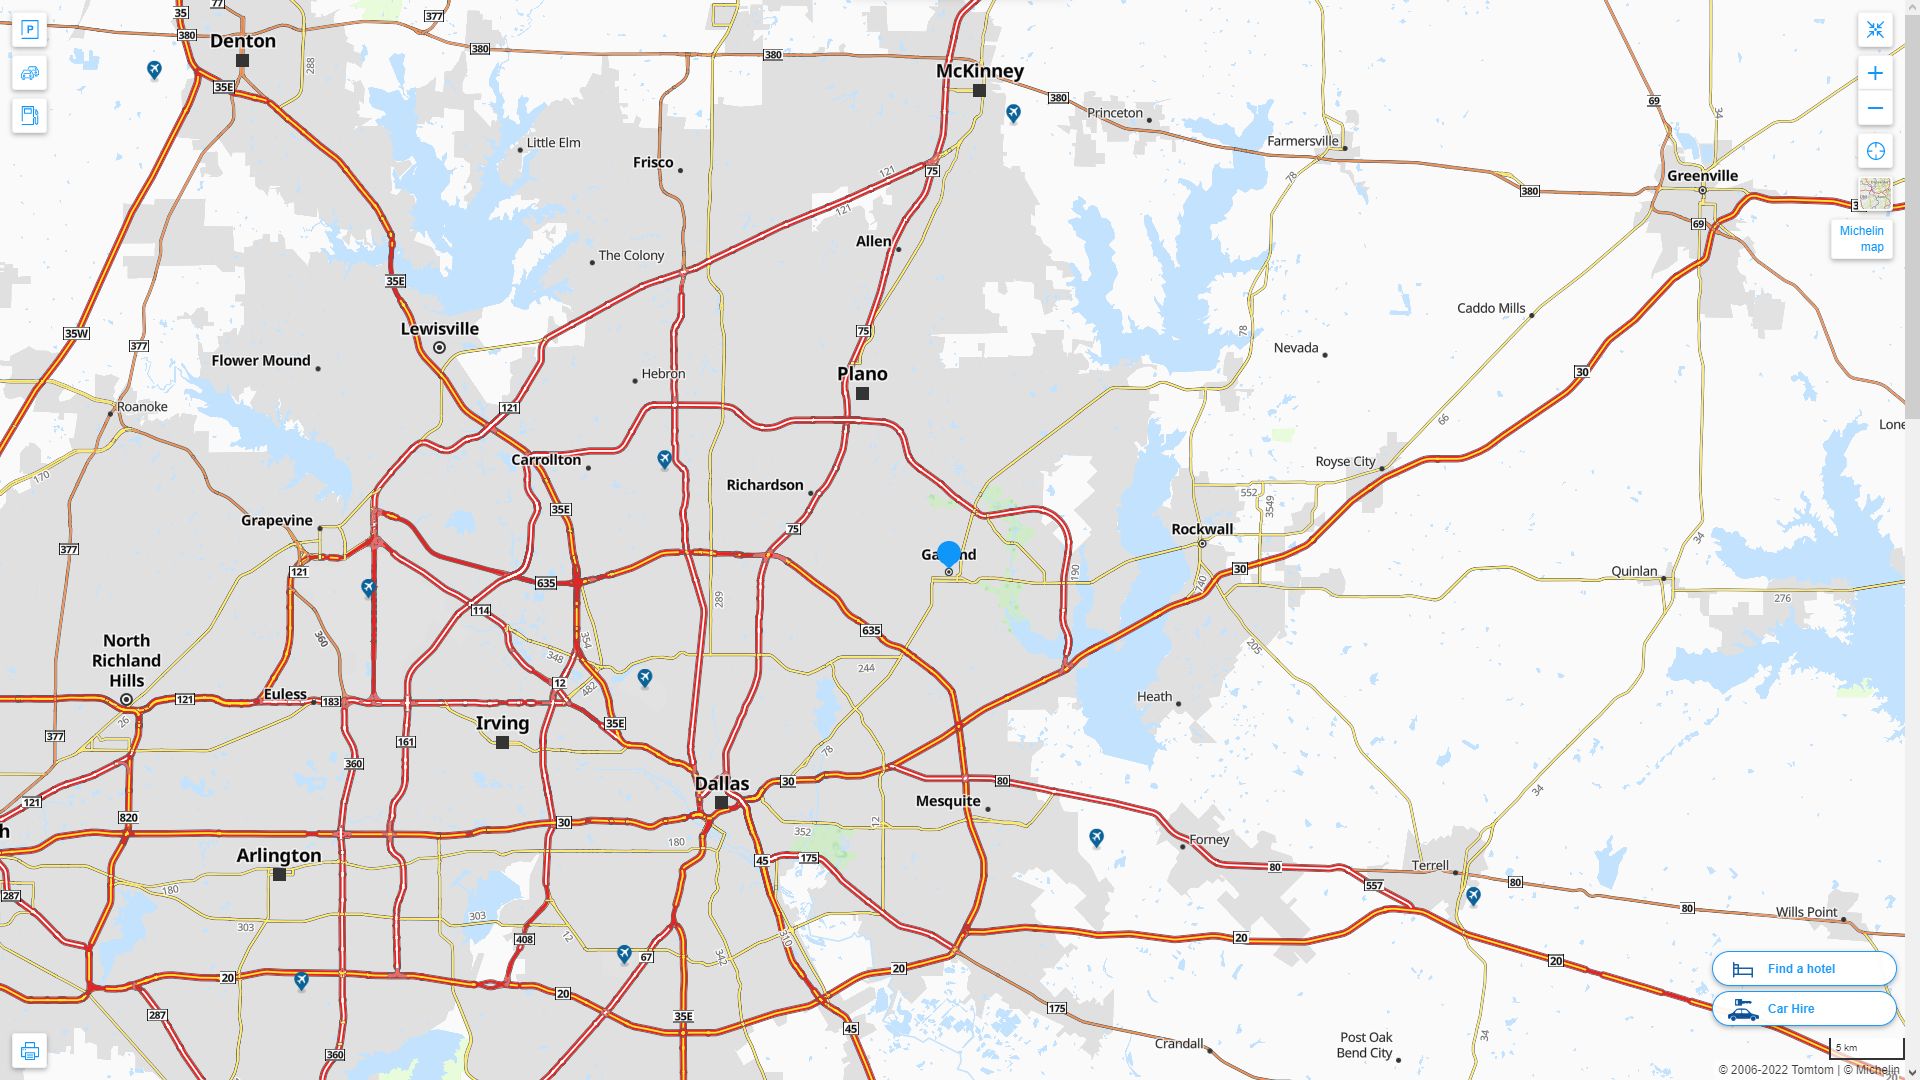 Garland Texas Highway and Road Map